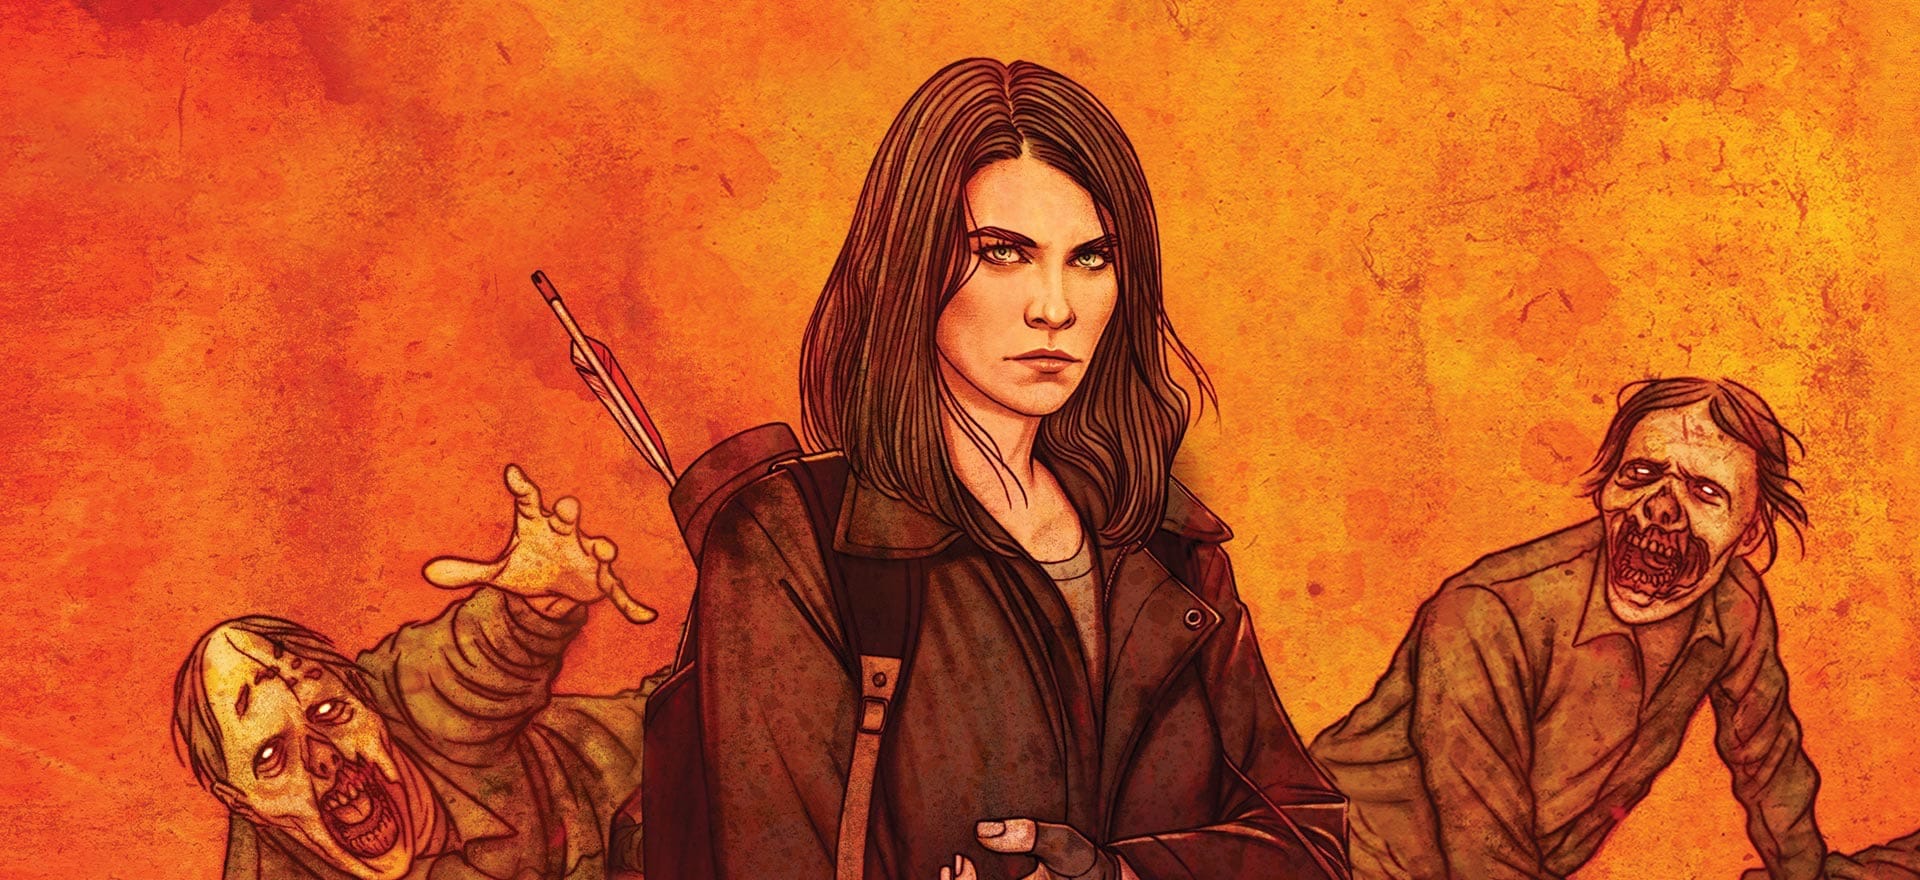 11 Weeks of TWD Art Looks to the Future With Maggie | TWDU News